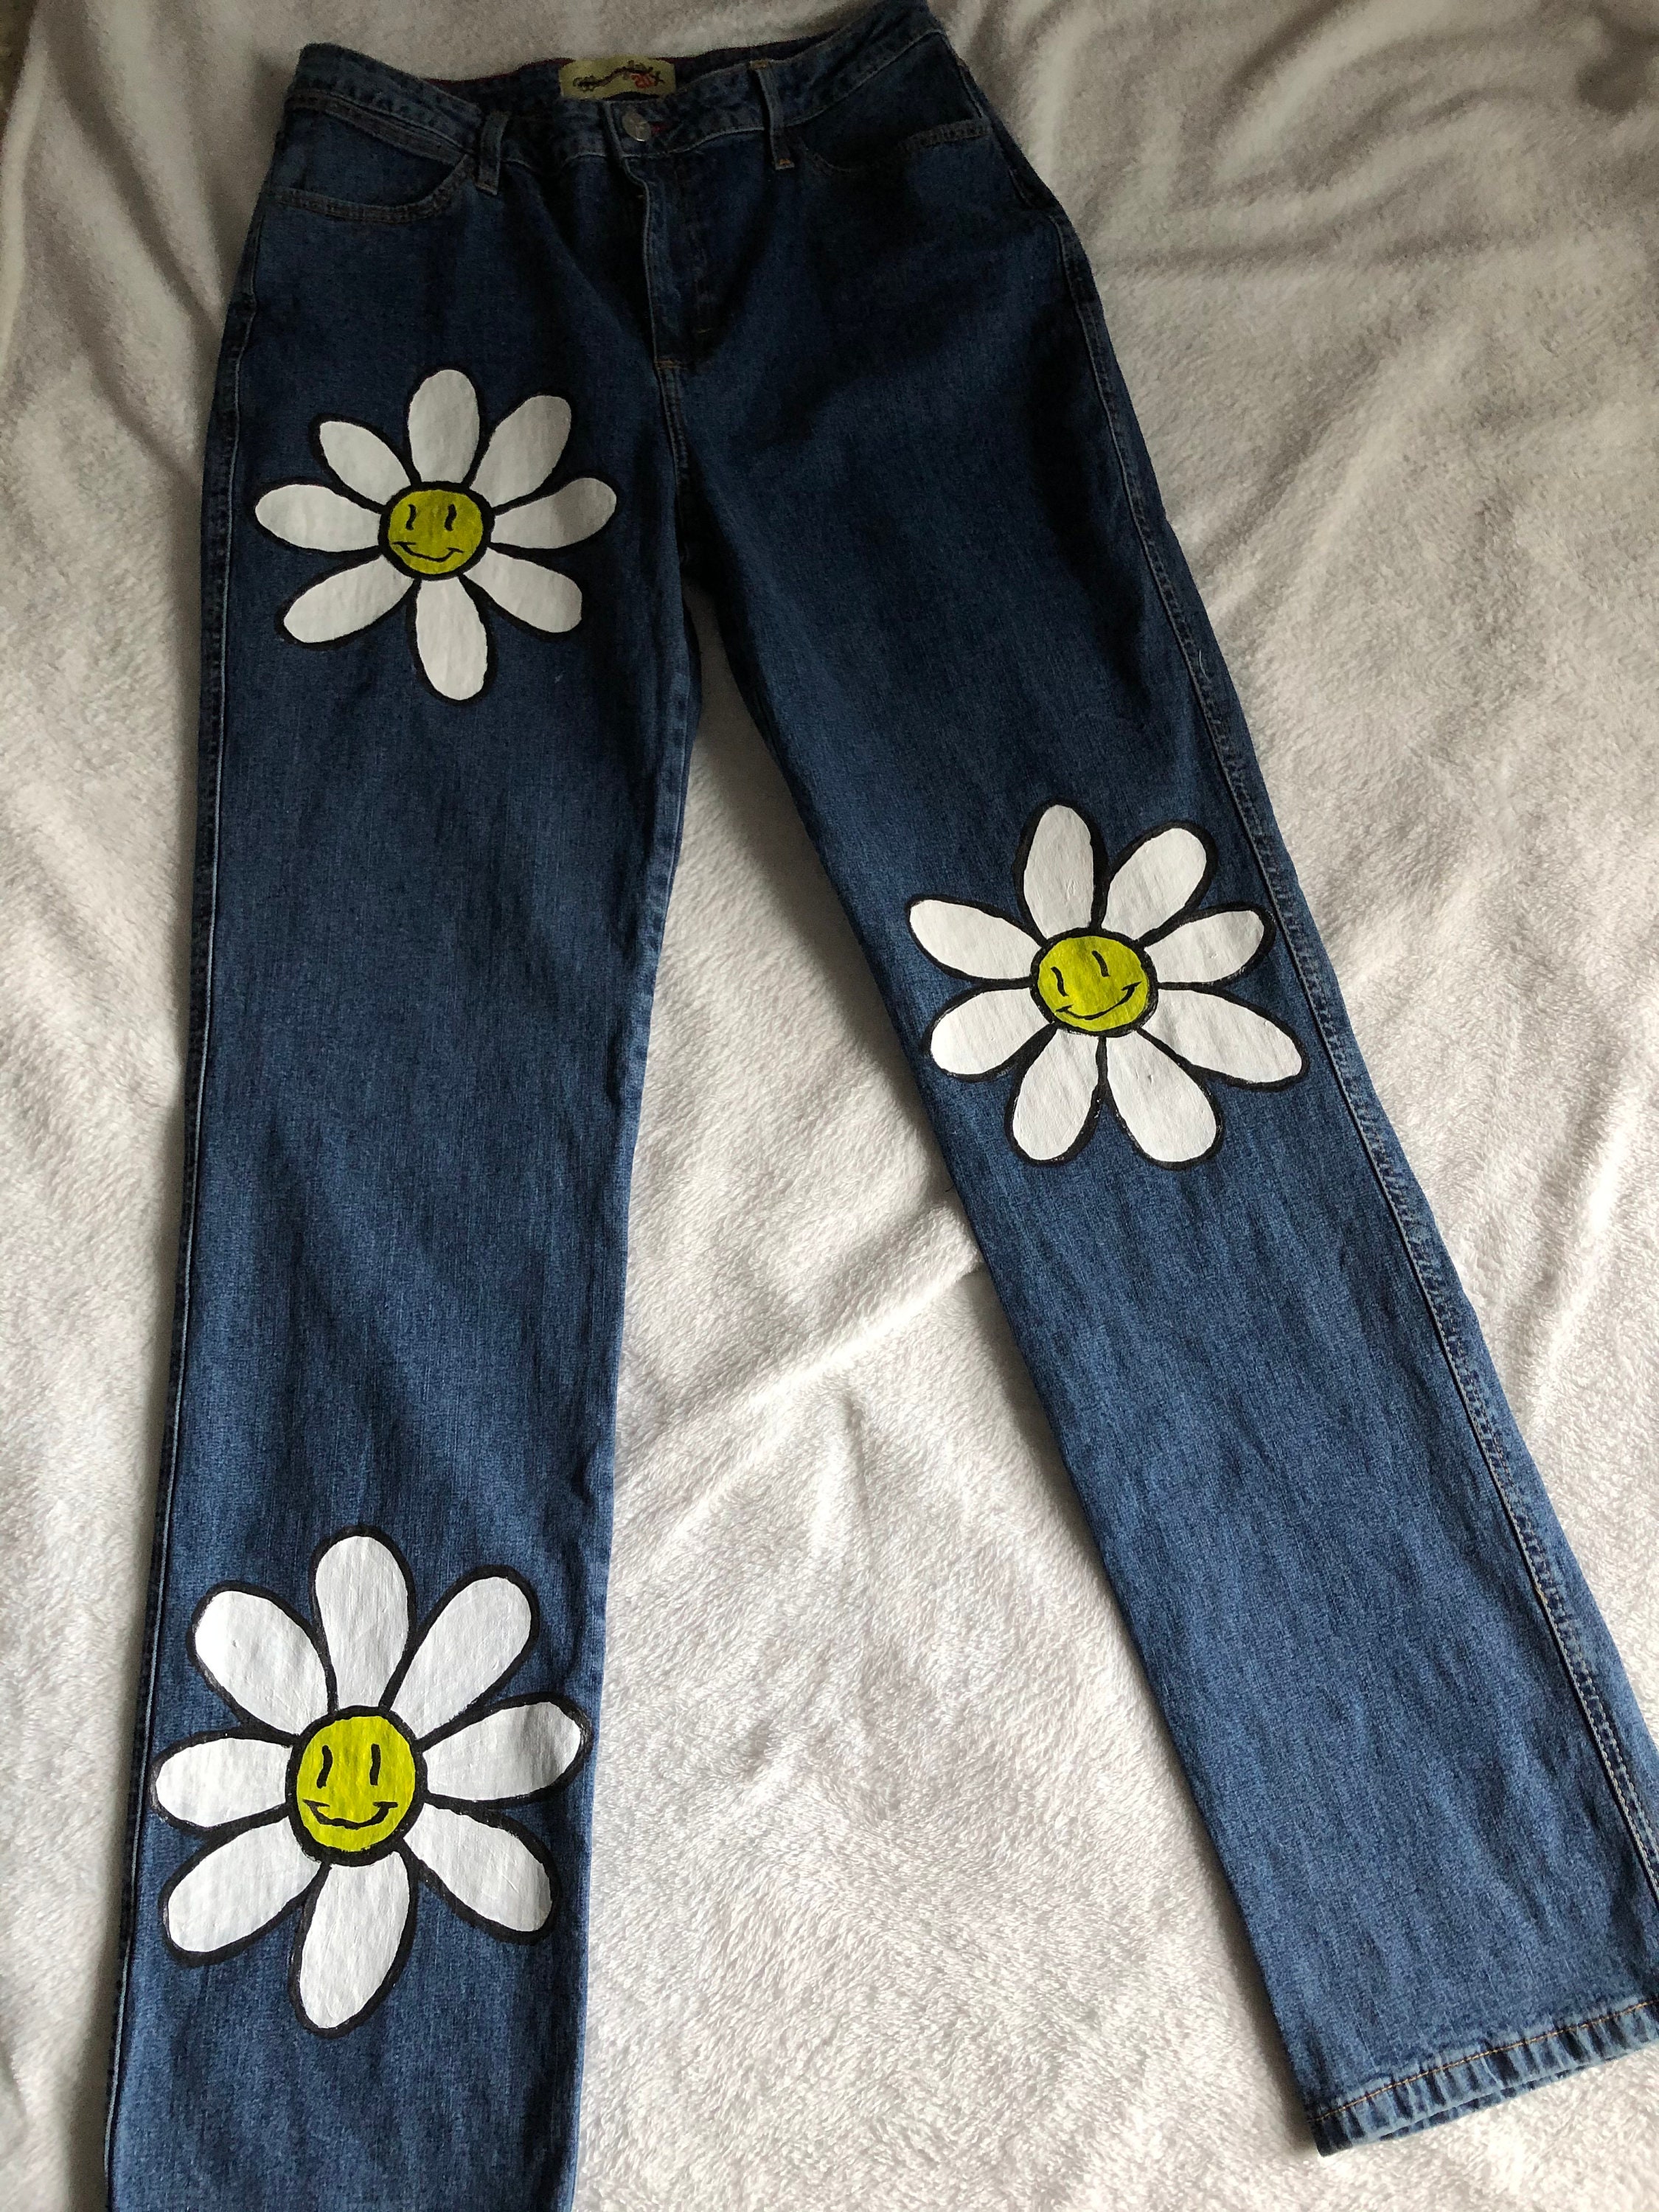 Painted Flower Jeans - Etsy